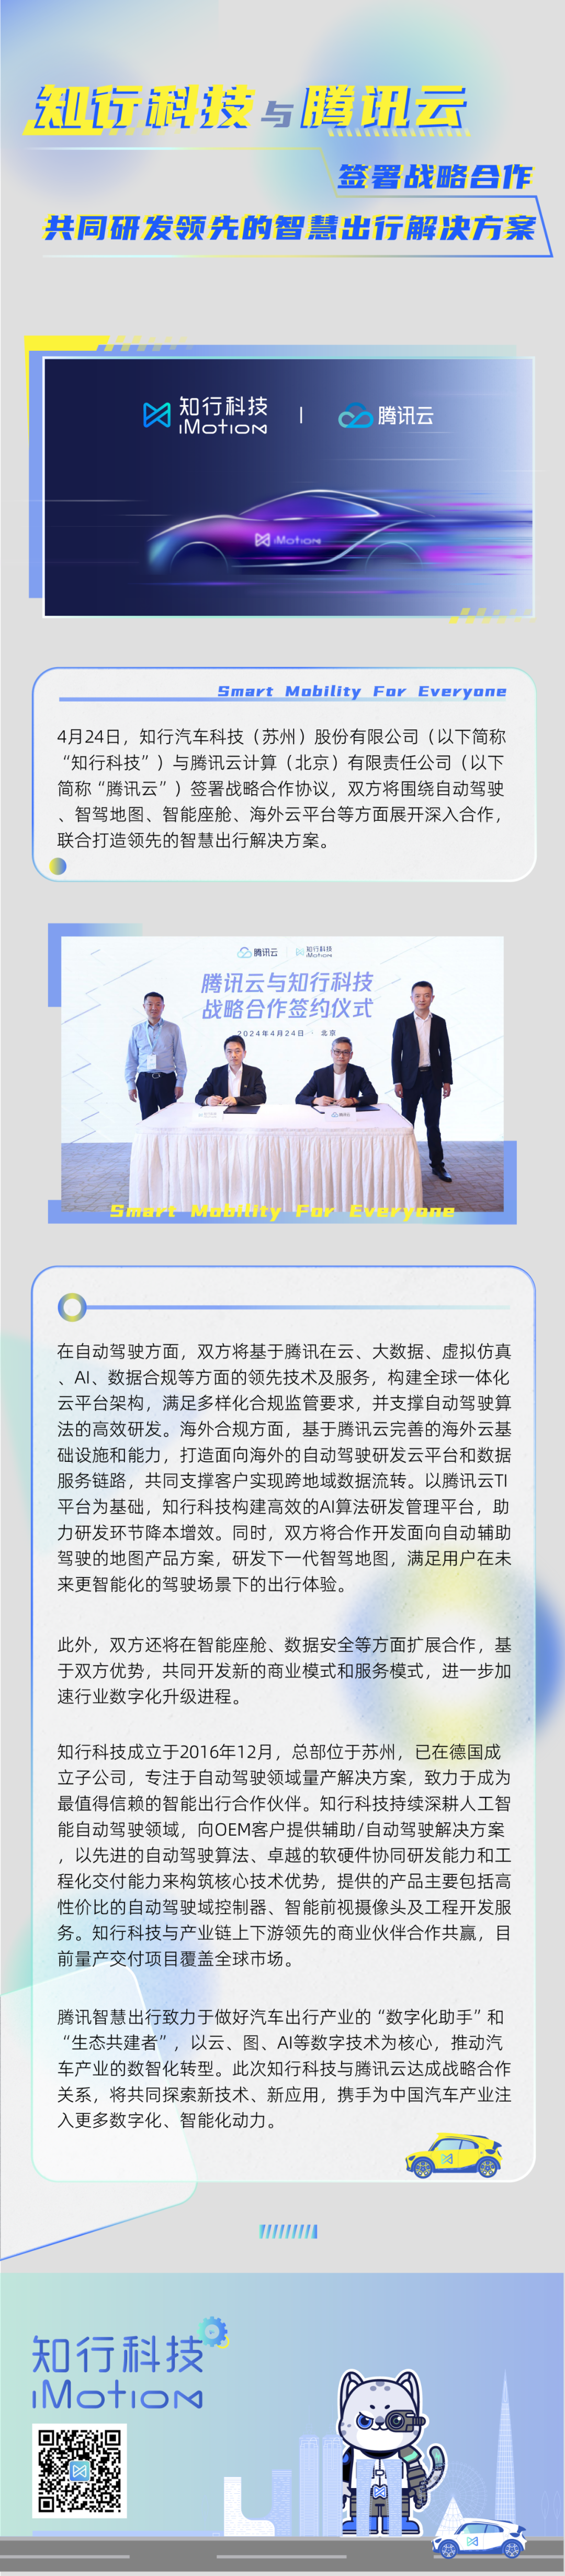 ZhiXing Technology signs a strategic cooperation agreement with Tencent Cloud to jointly develop leading smart mobility solutions.